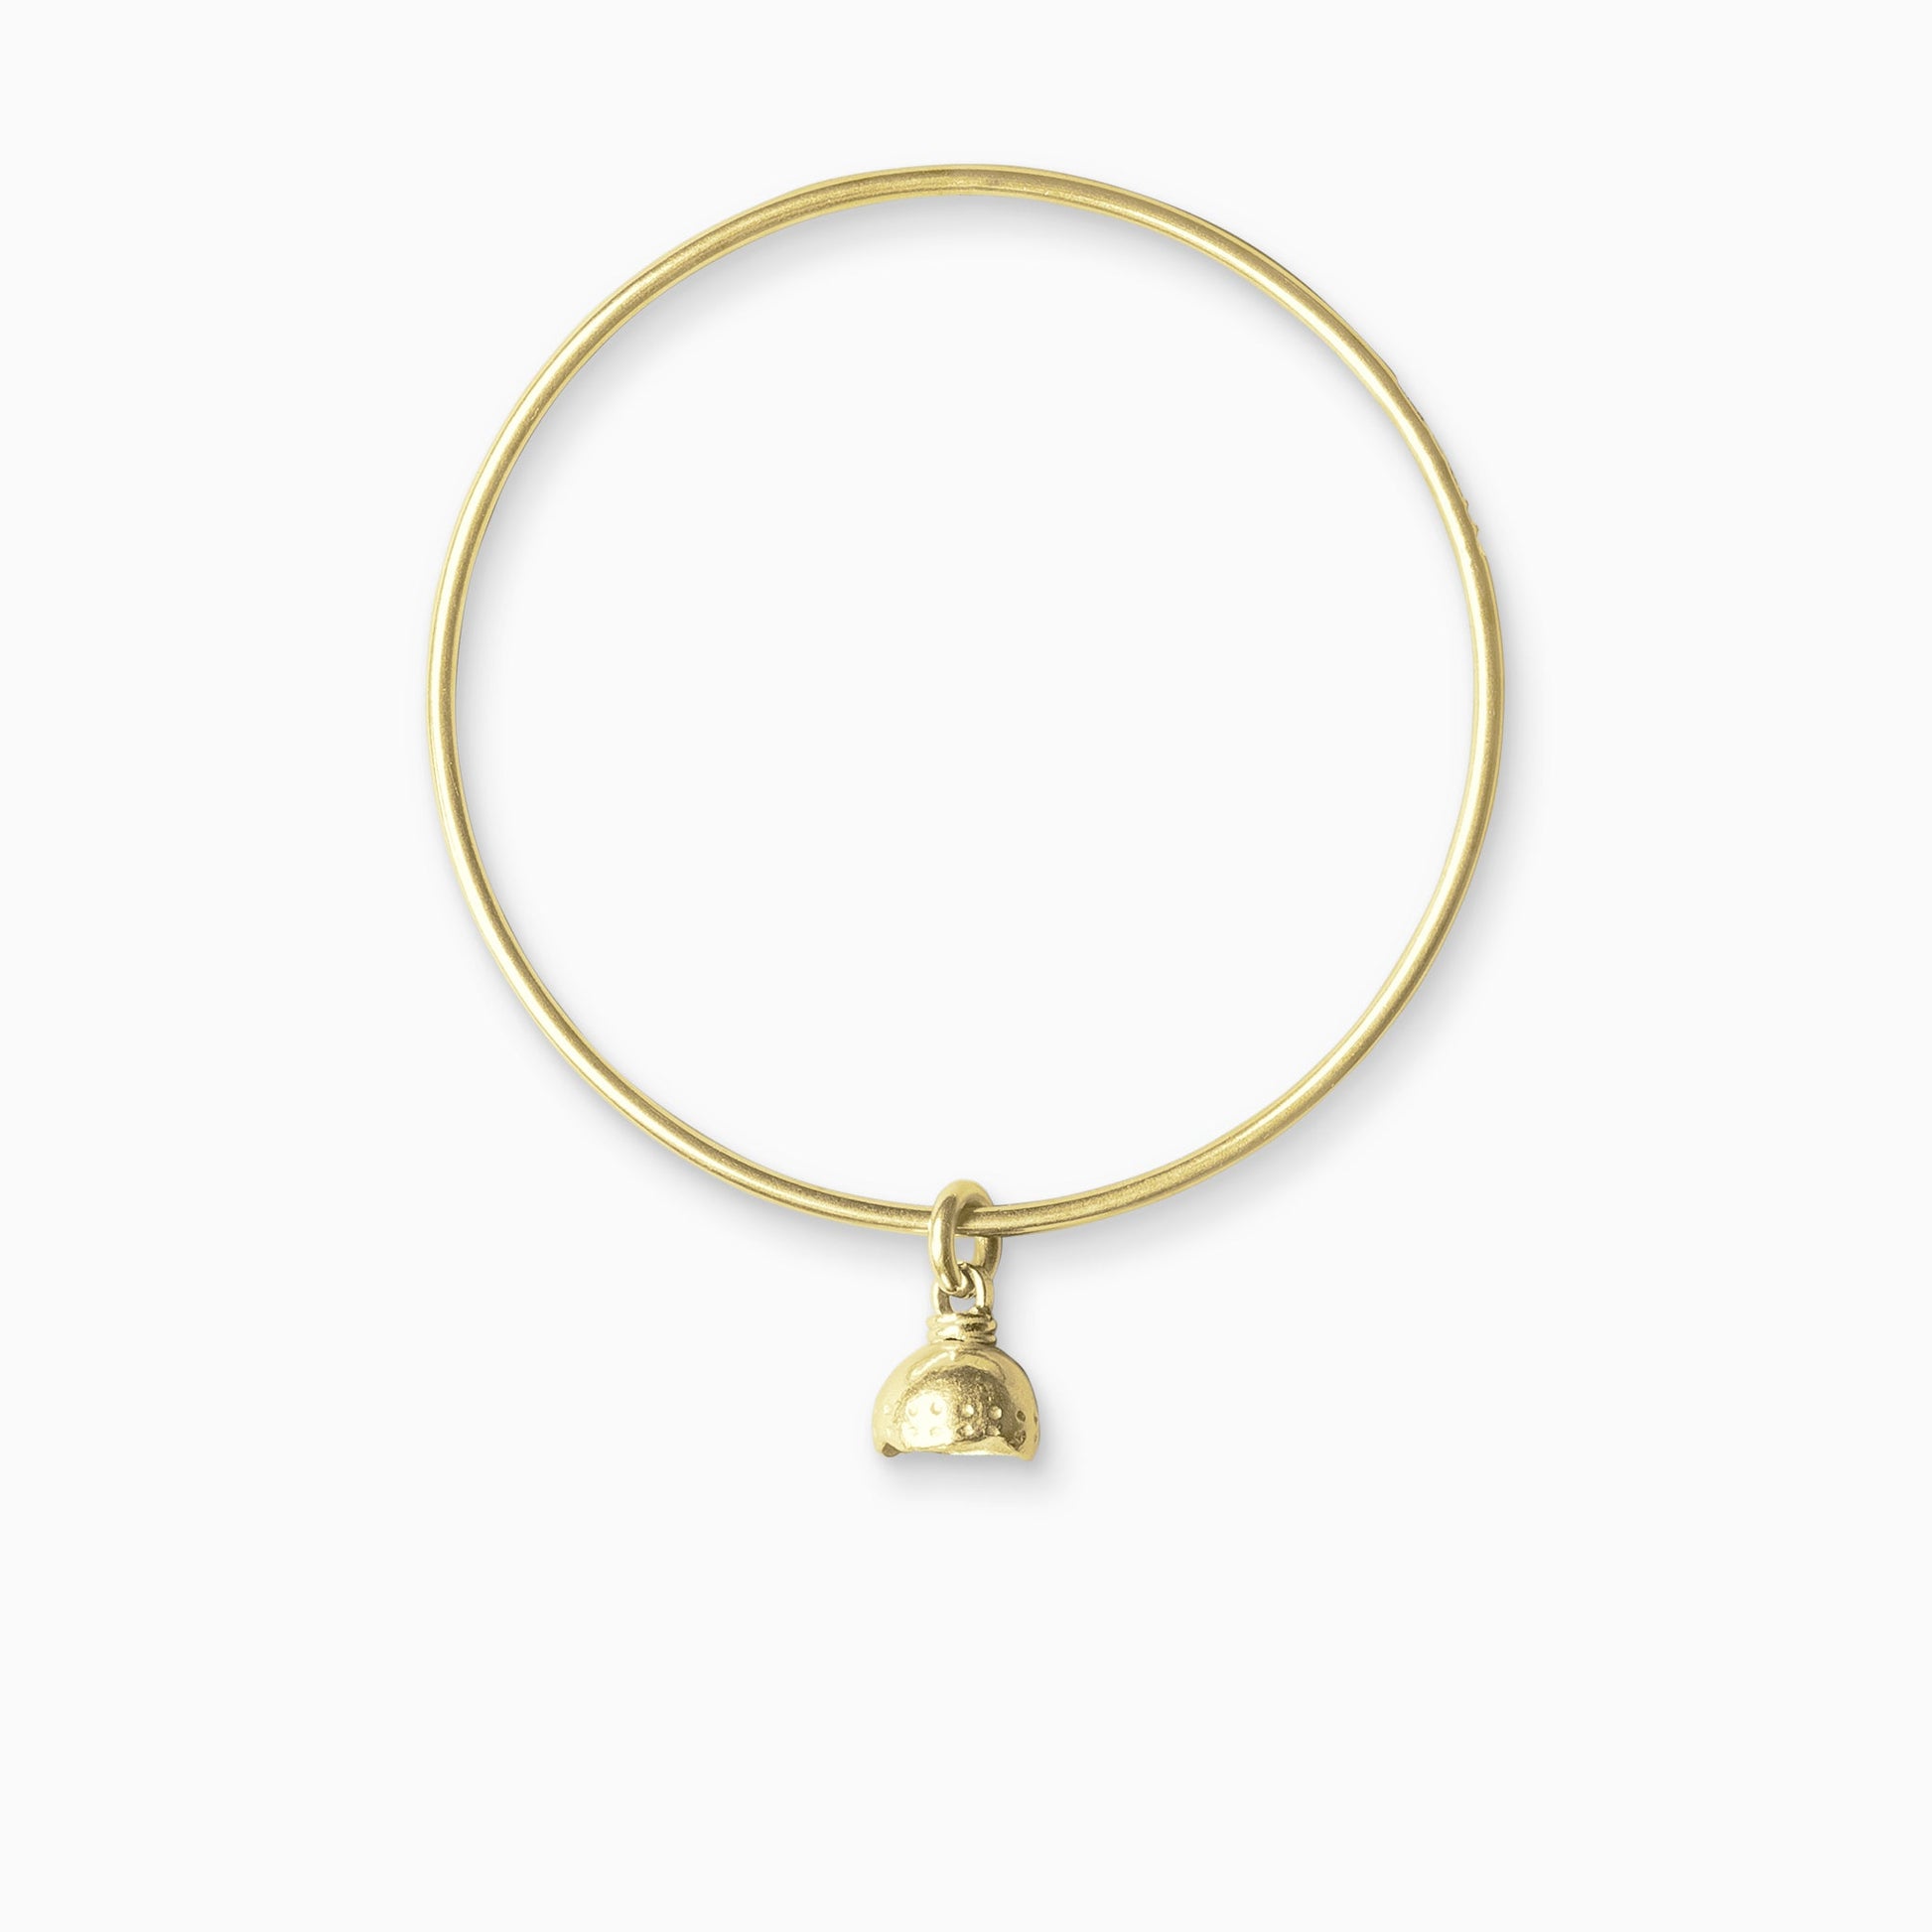 An 18ct Fairtrade yellow gold bell shaped charm freely moving on a round wire bangle. Charm 11mm. Bangle 63mm inside diameter x 2mm round wire.